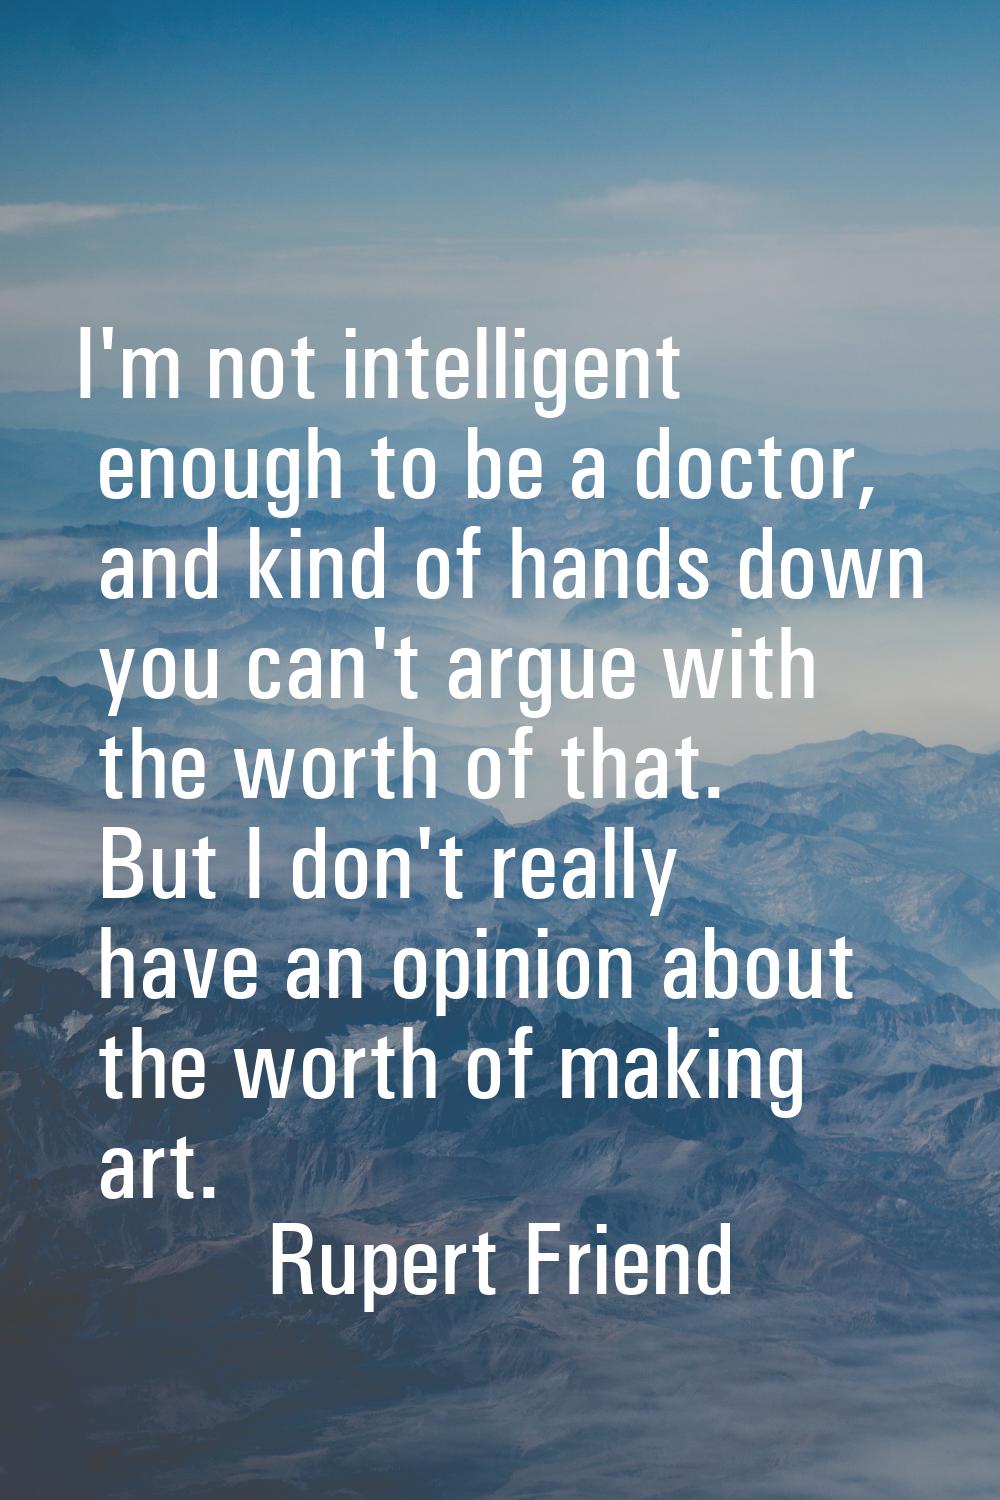 I'm not intelligent enough to be a doctor, and kind of hands down you can't argue with the worth of